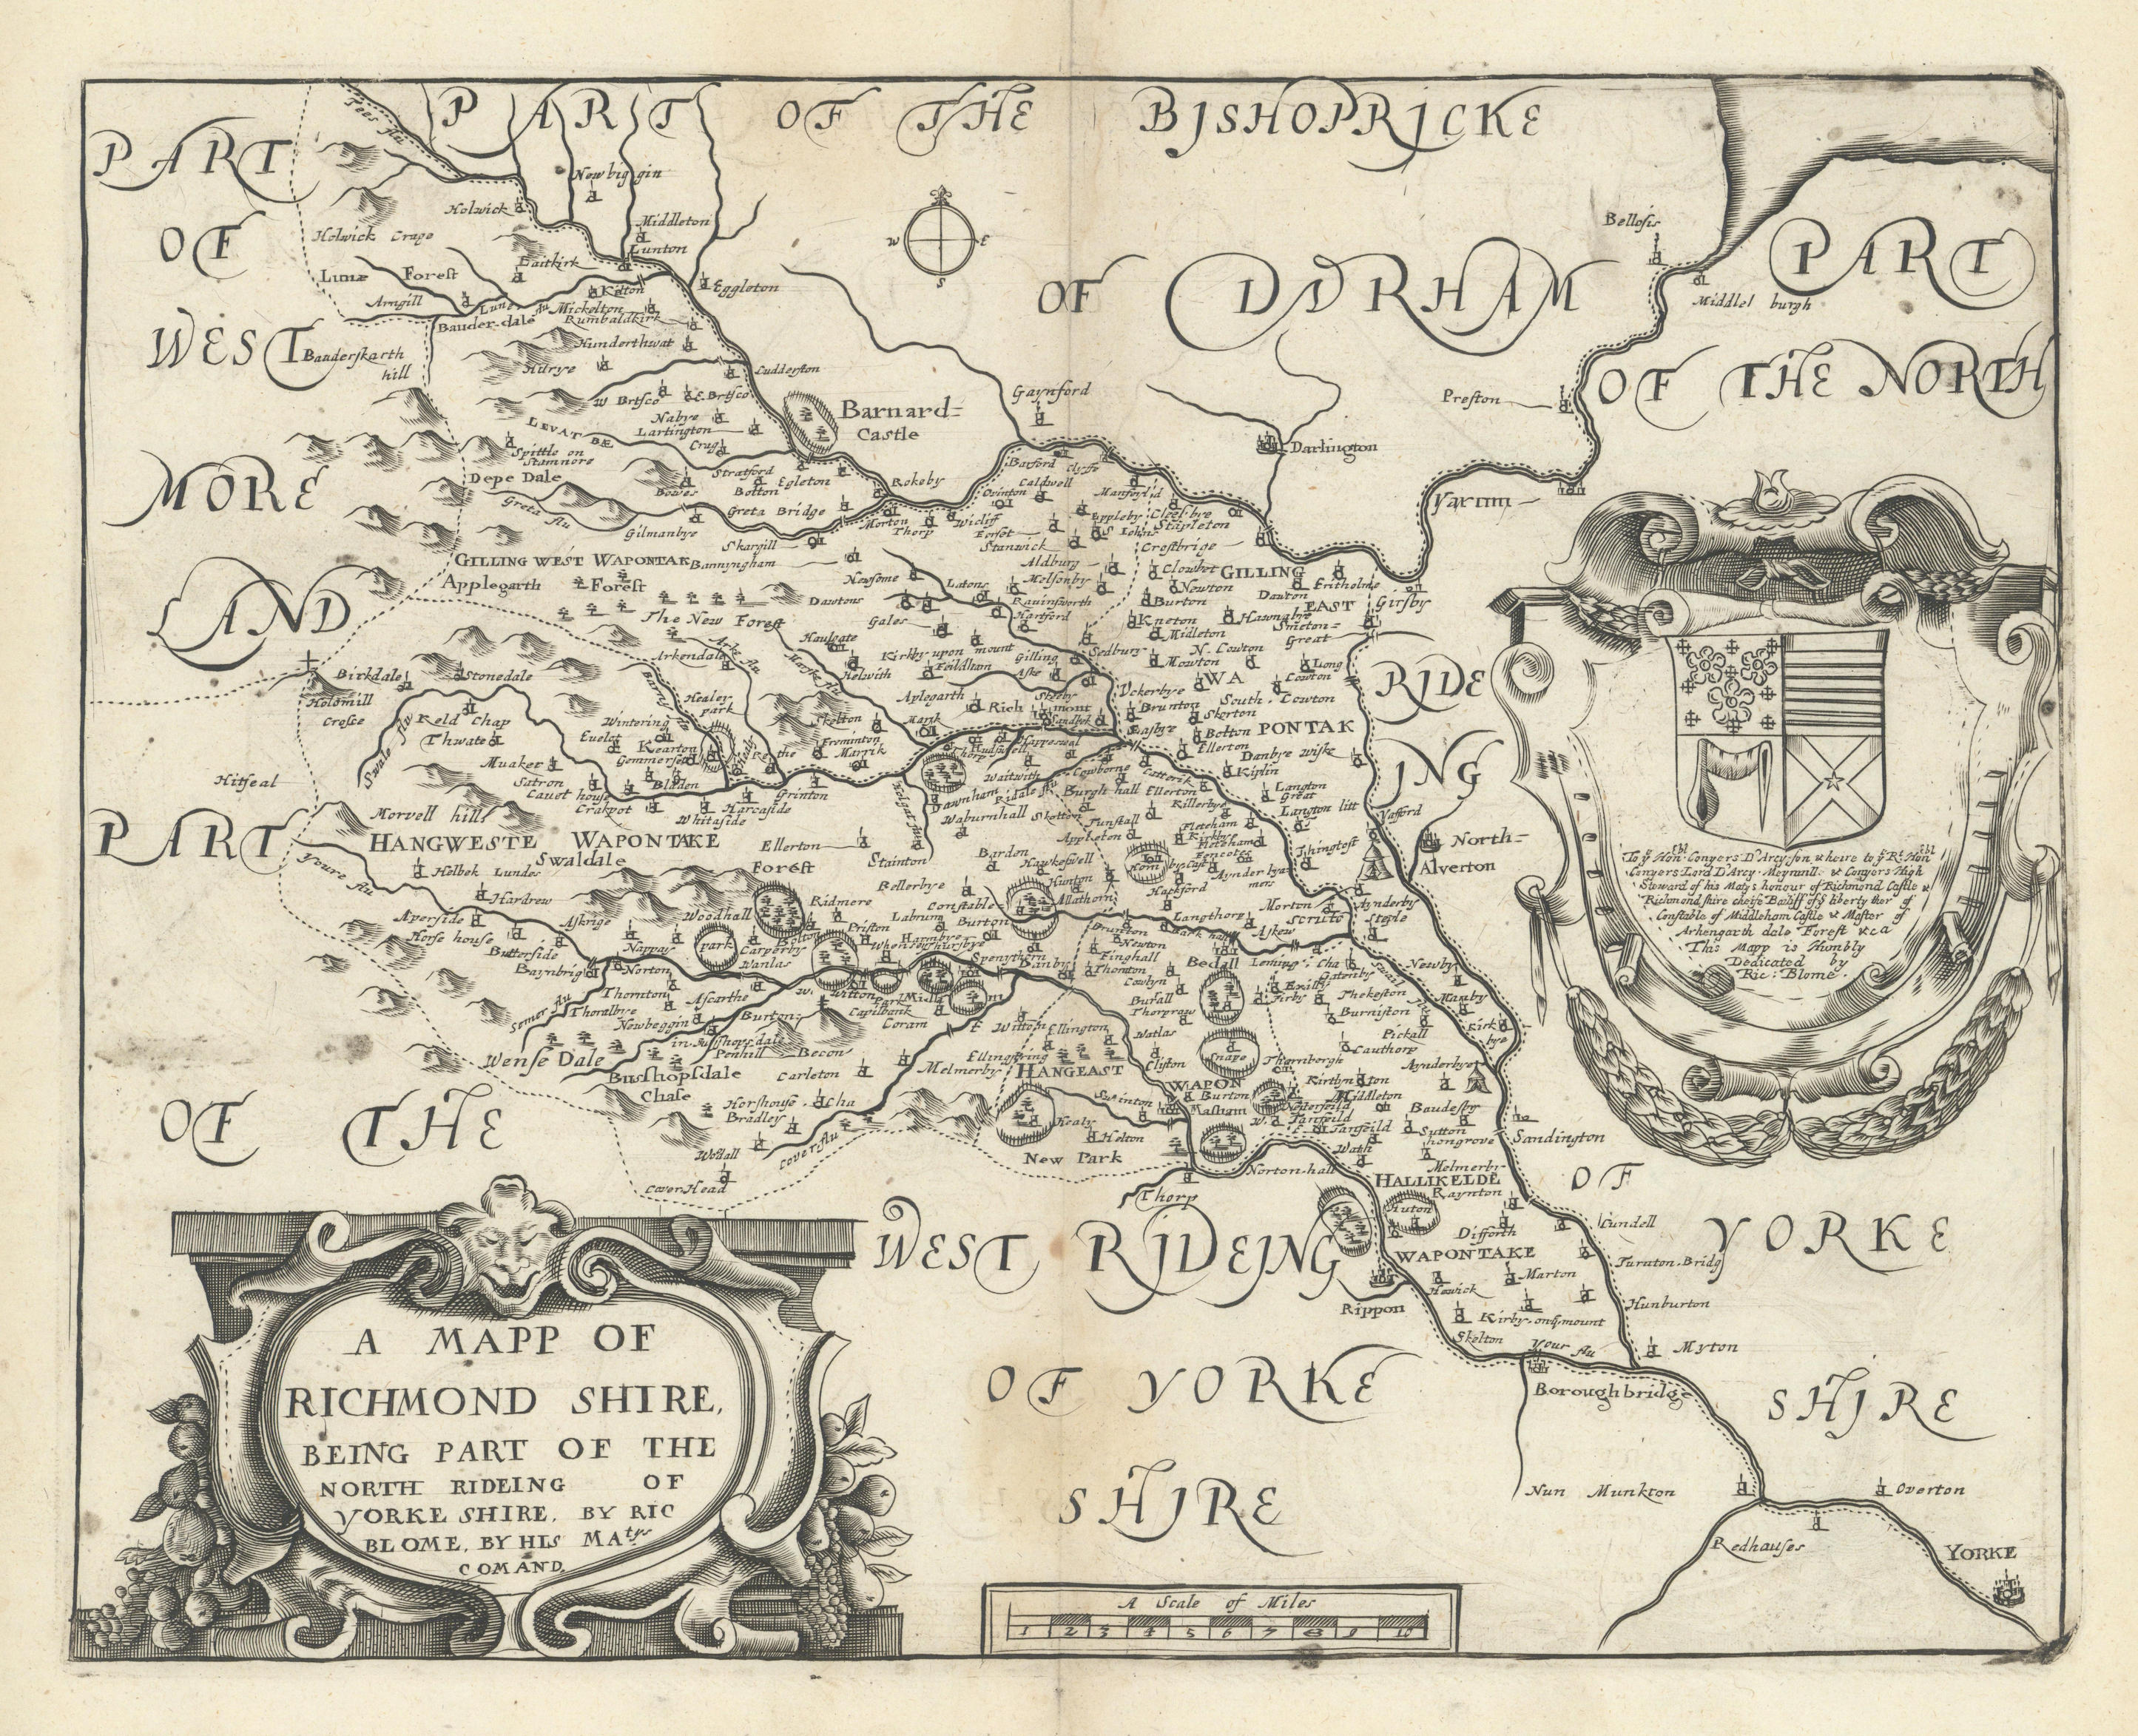 Associate Product A Mapp of Richmond Shire… Part of the North Rideing of Yorke Shire. BLOME 1673